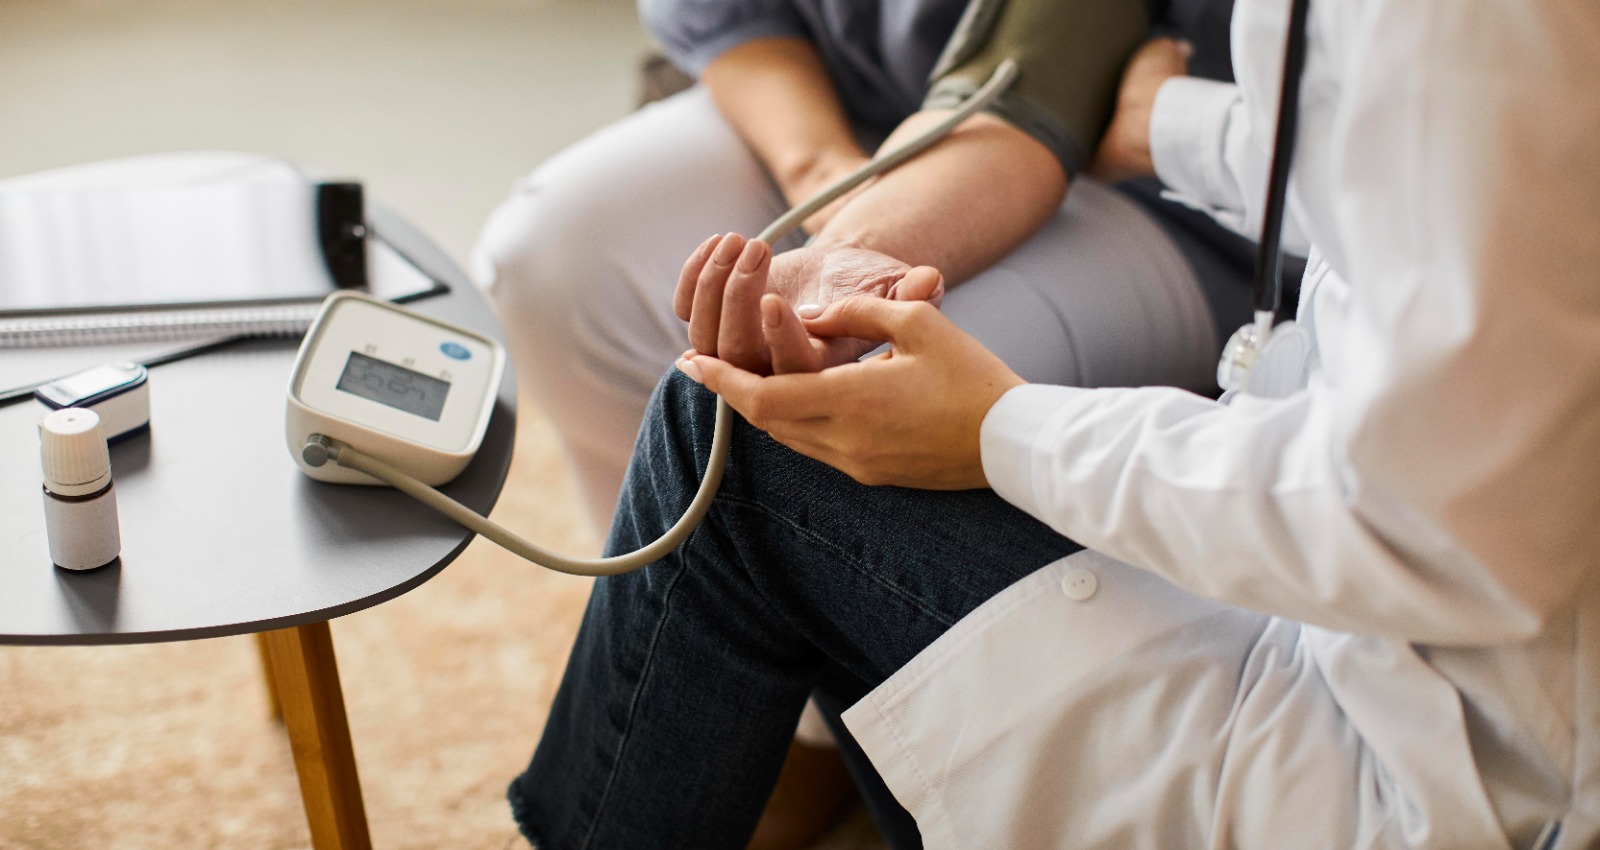 Which ayurvedic medicine helps for blood pressure control?